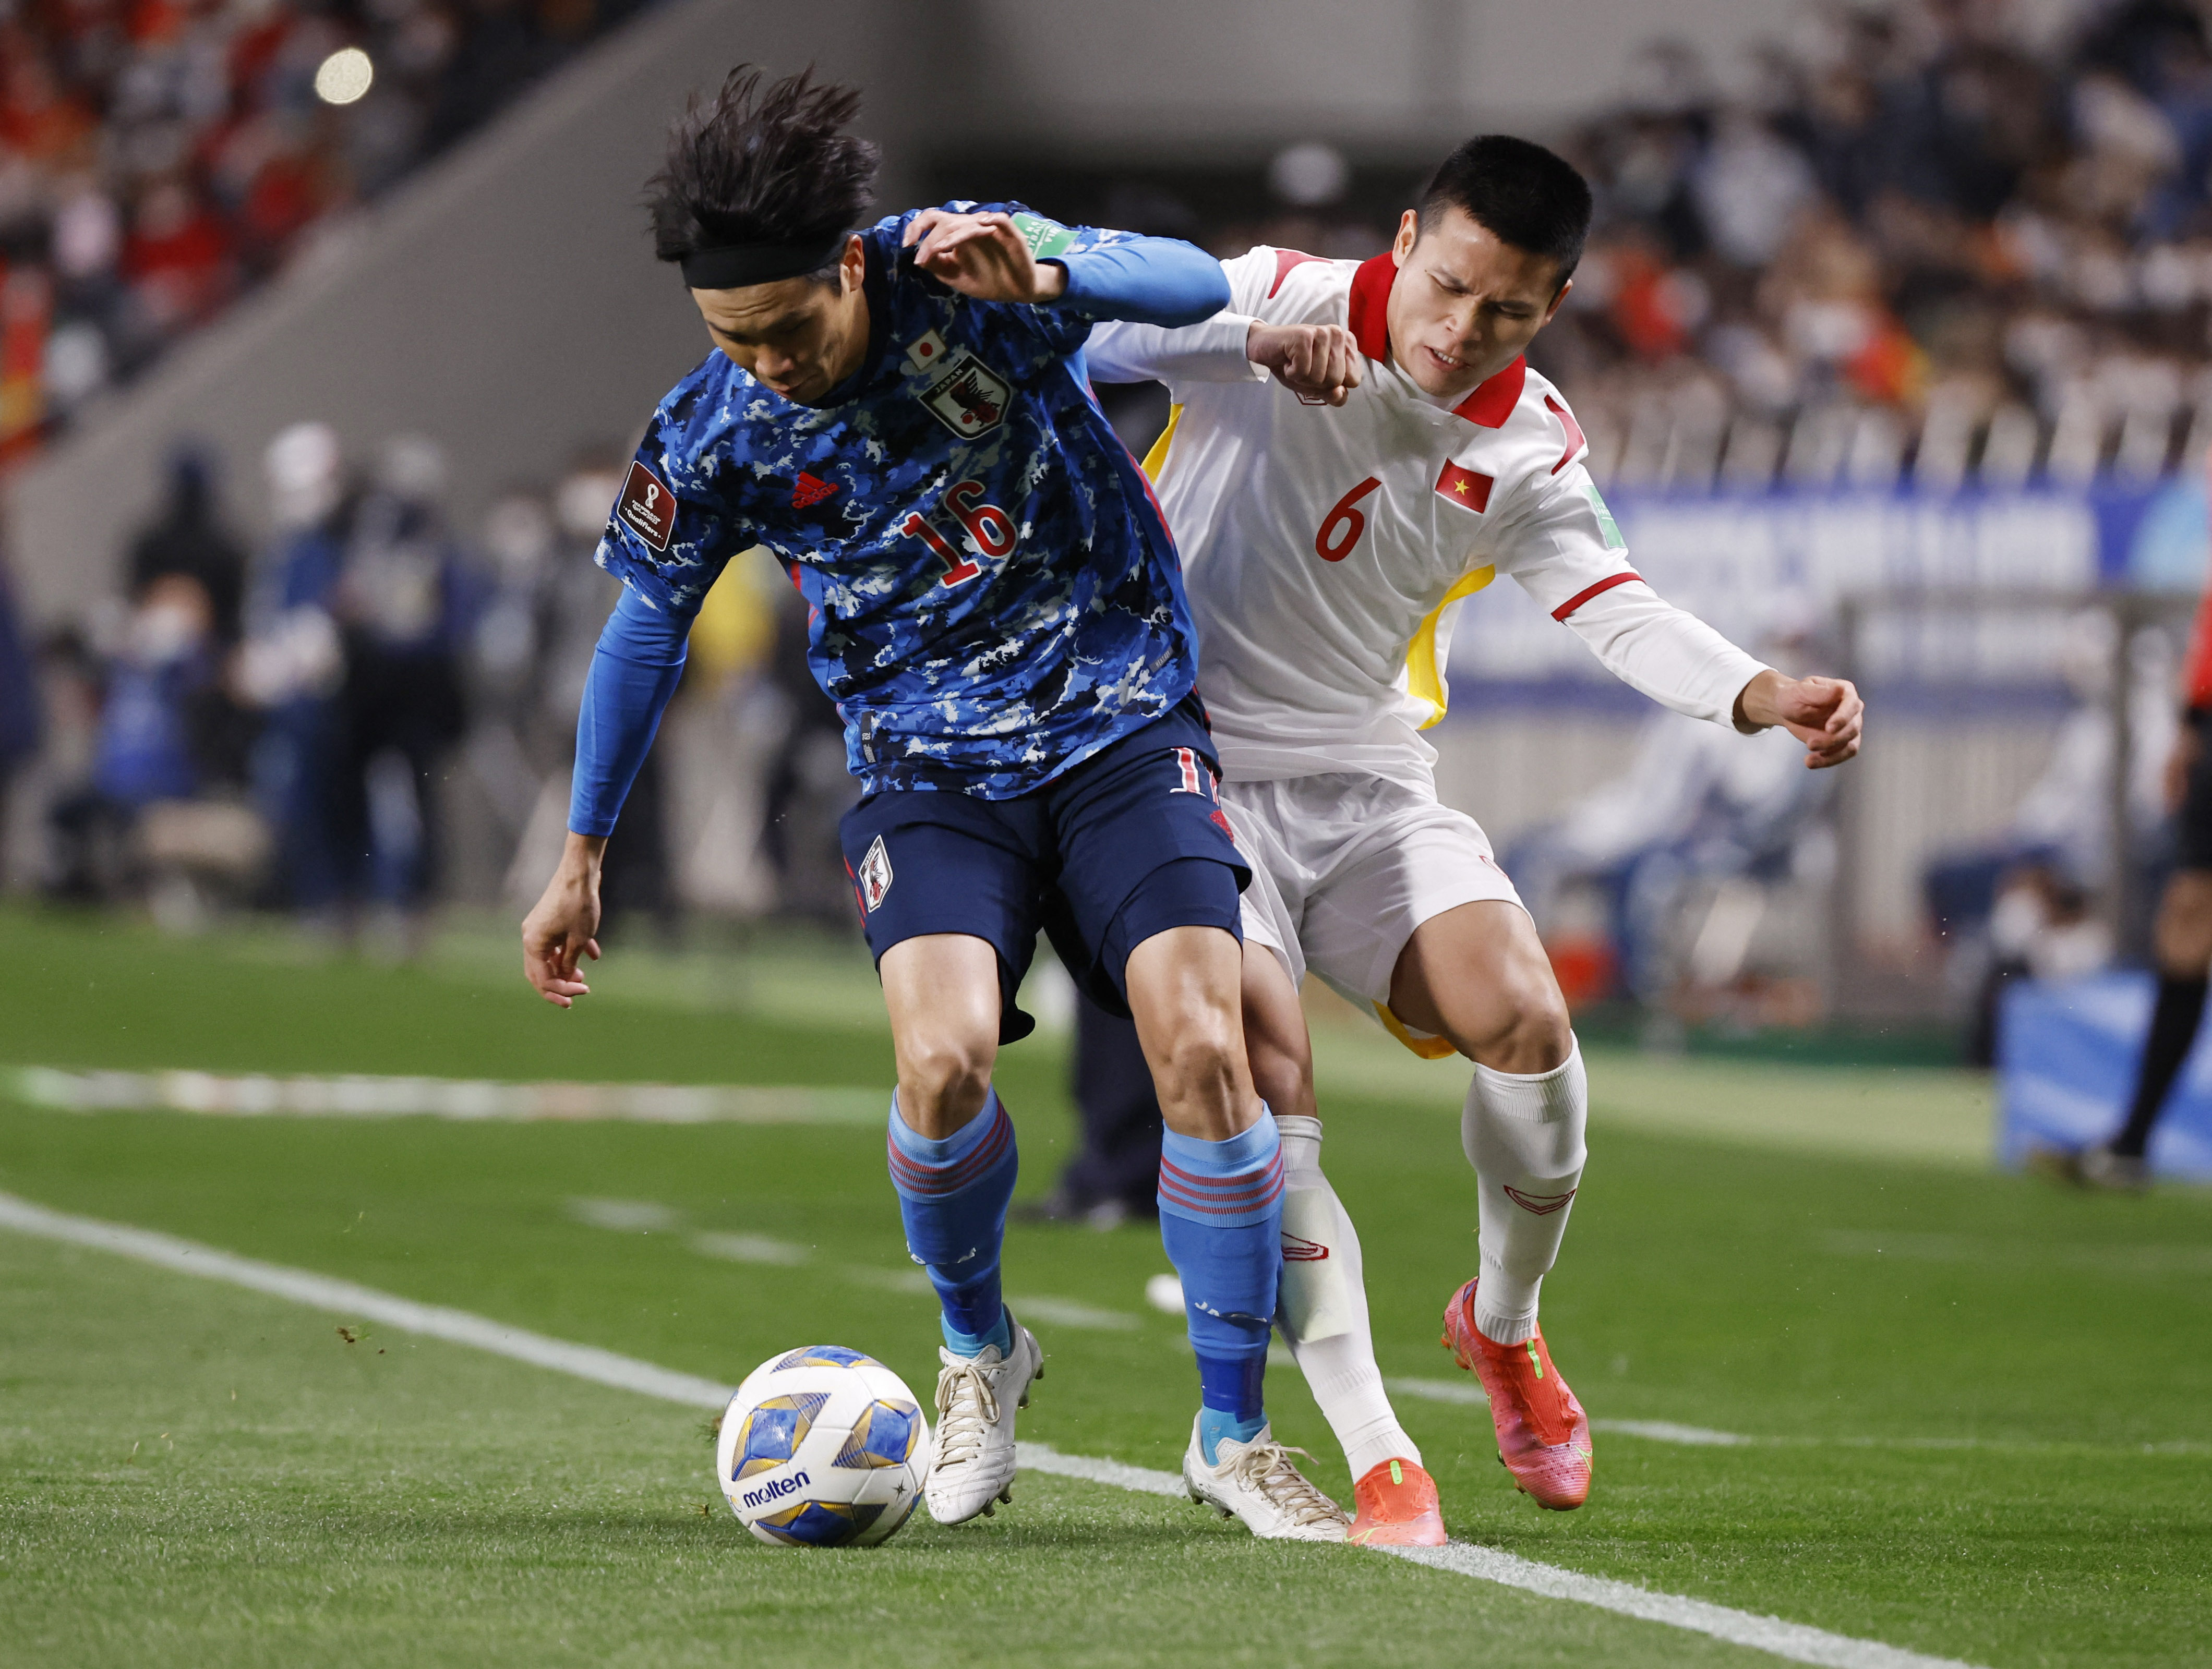 Vietnamese (white jersey) and Japanese players vie for the ball in their last game of the 2022 FIFA World Cup Asian qualifiers at Saitama Stadium, March 29, 2022. Photo: Reuters